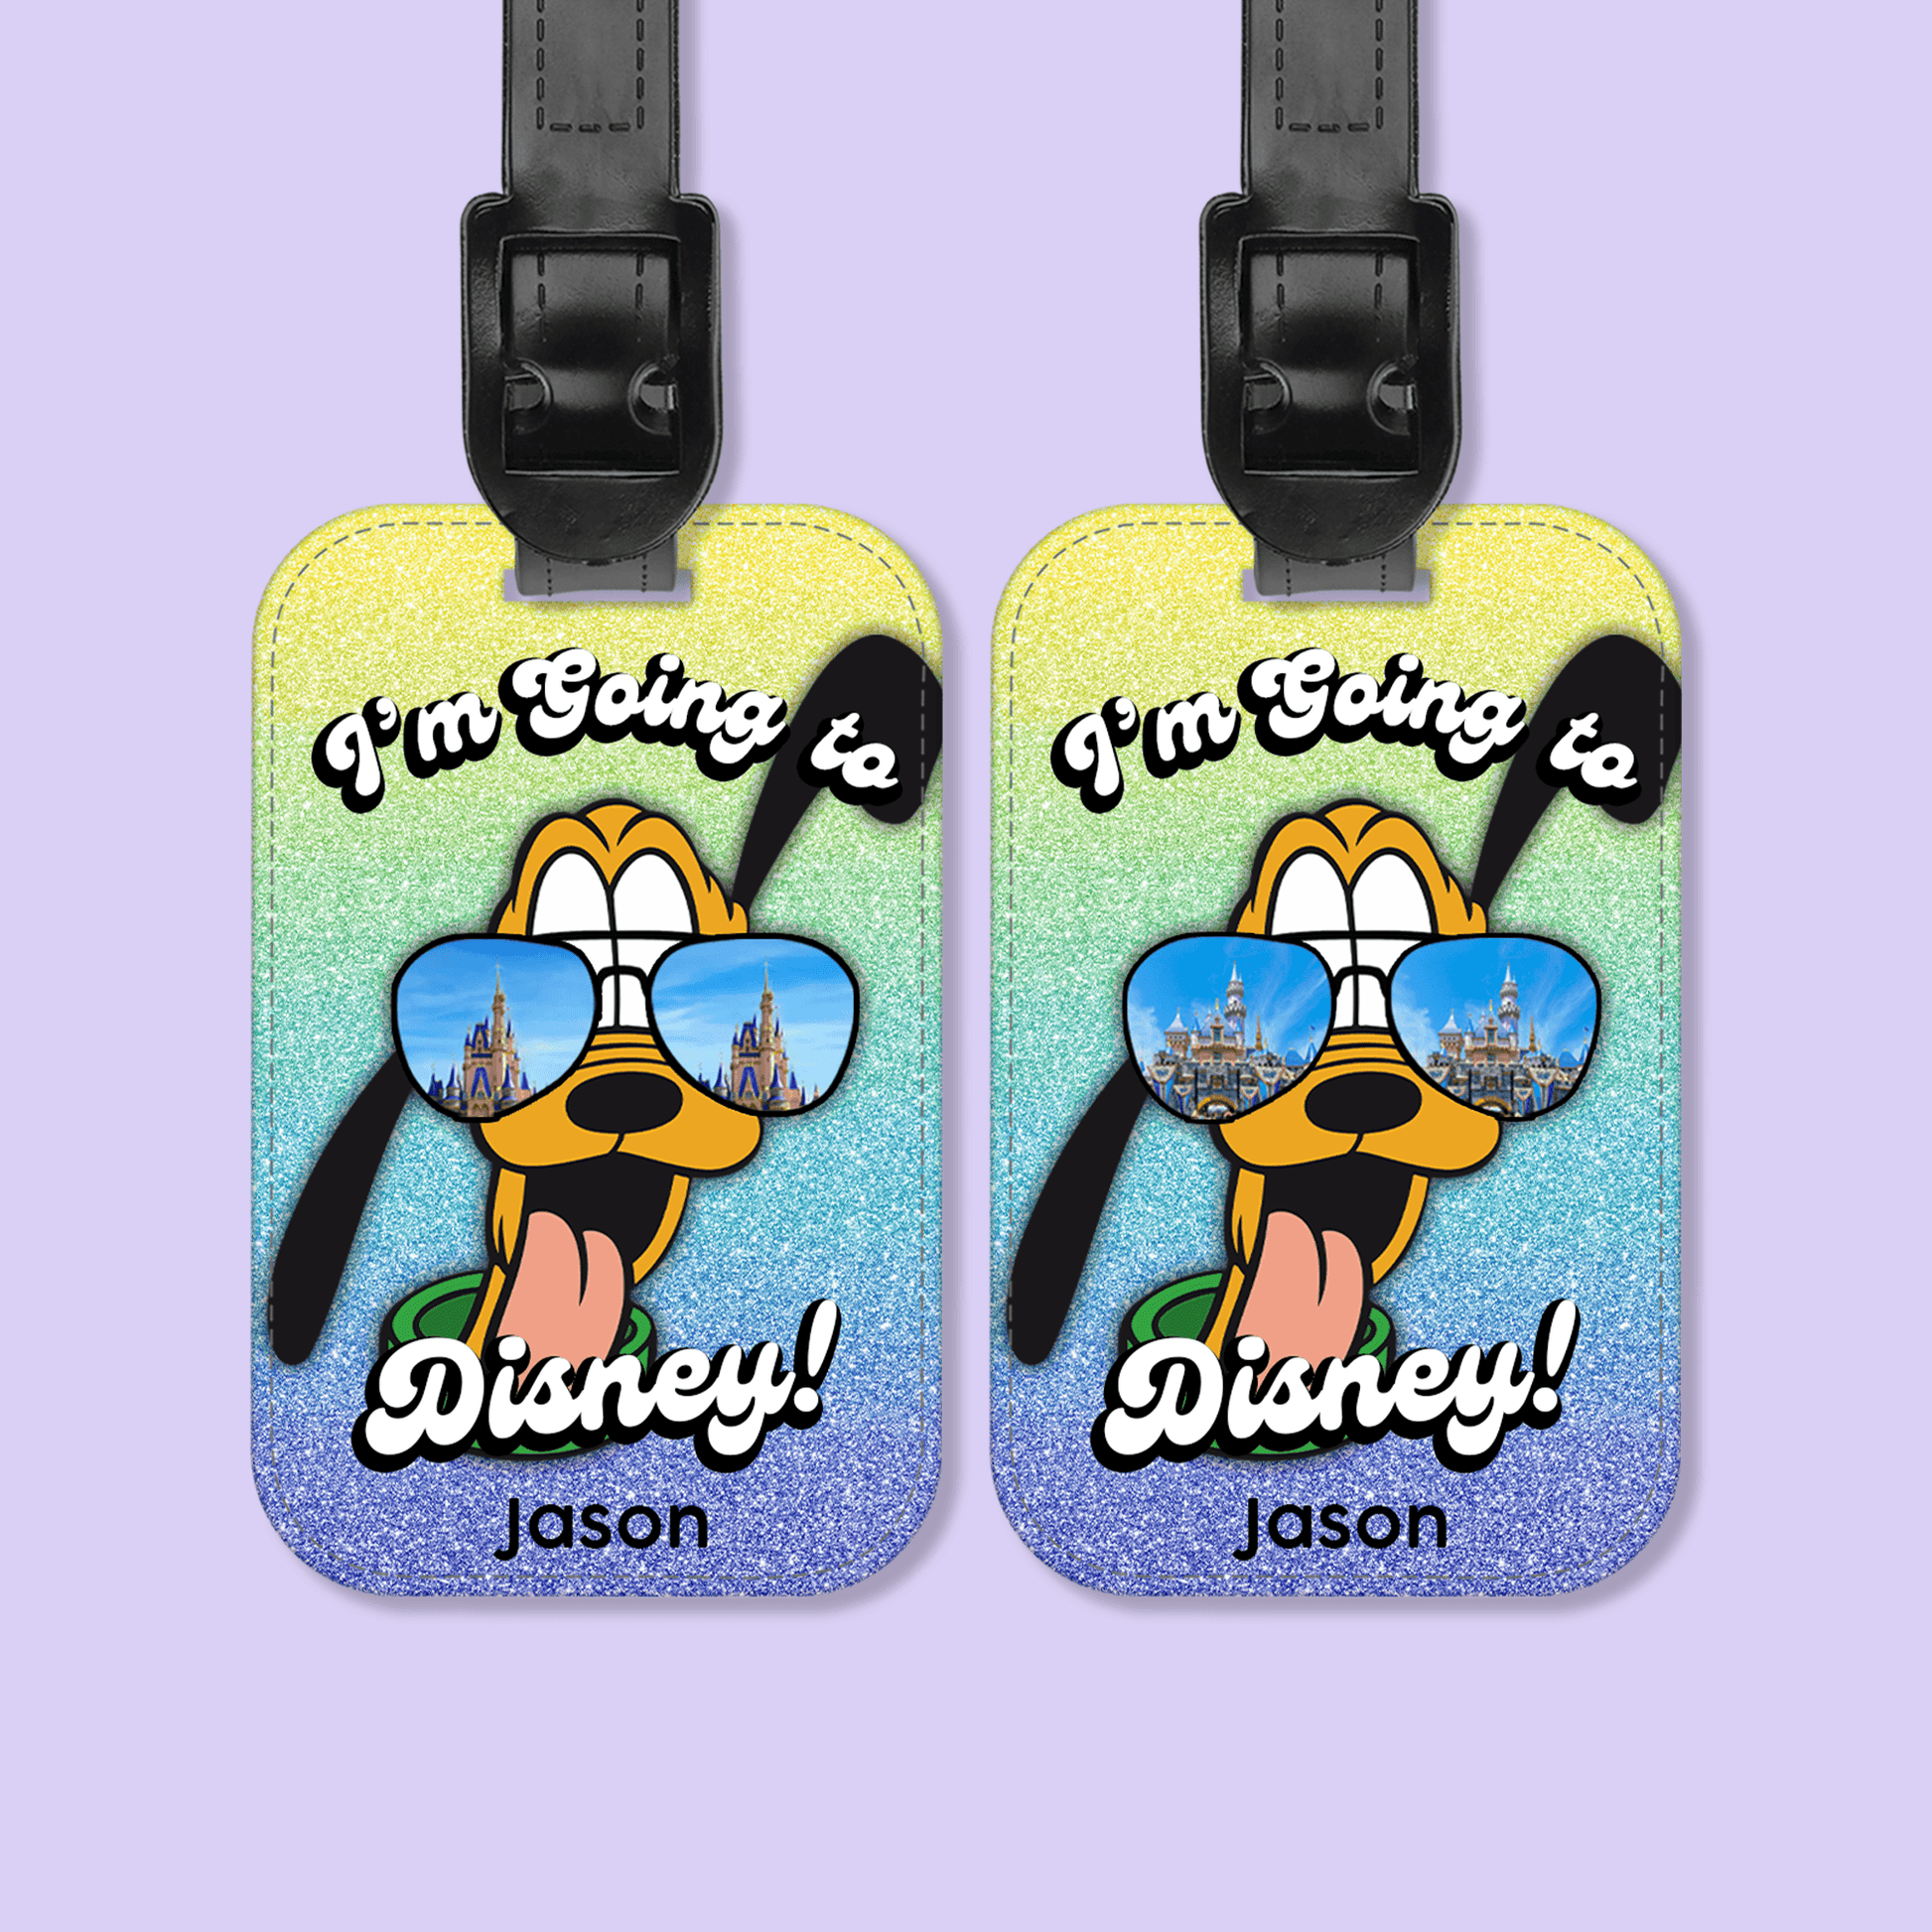 I'm Going to Disney Personalized Luggage Tag - Pluto - Two Crafty Gays